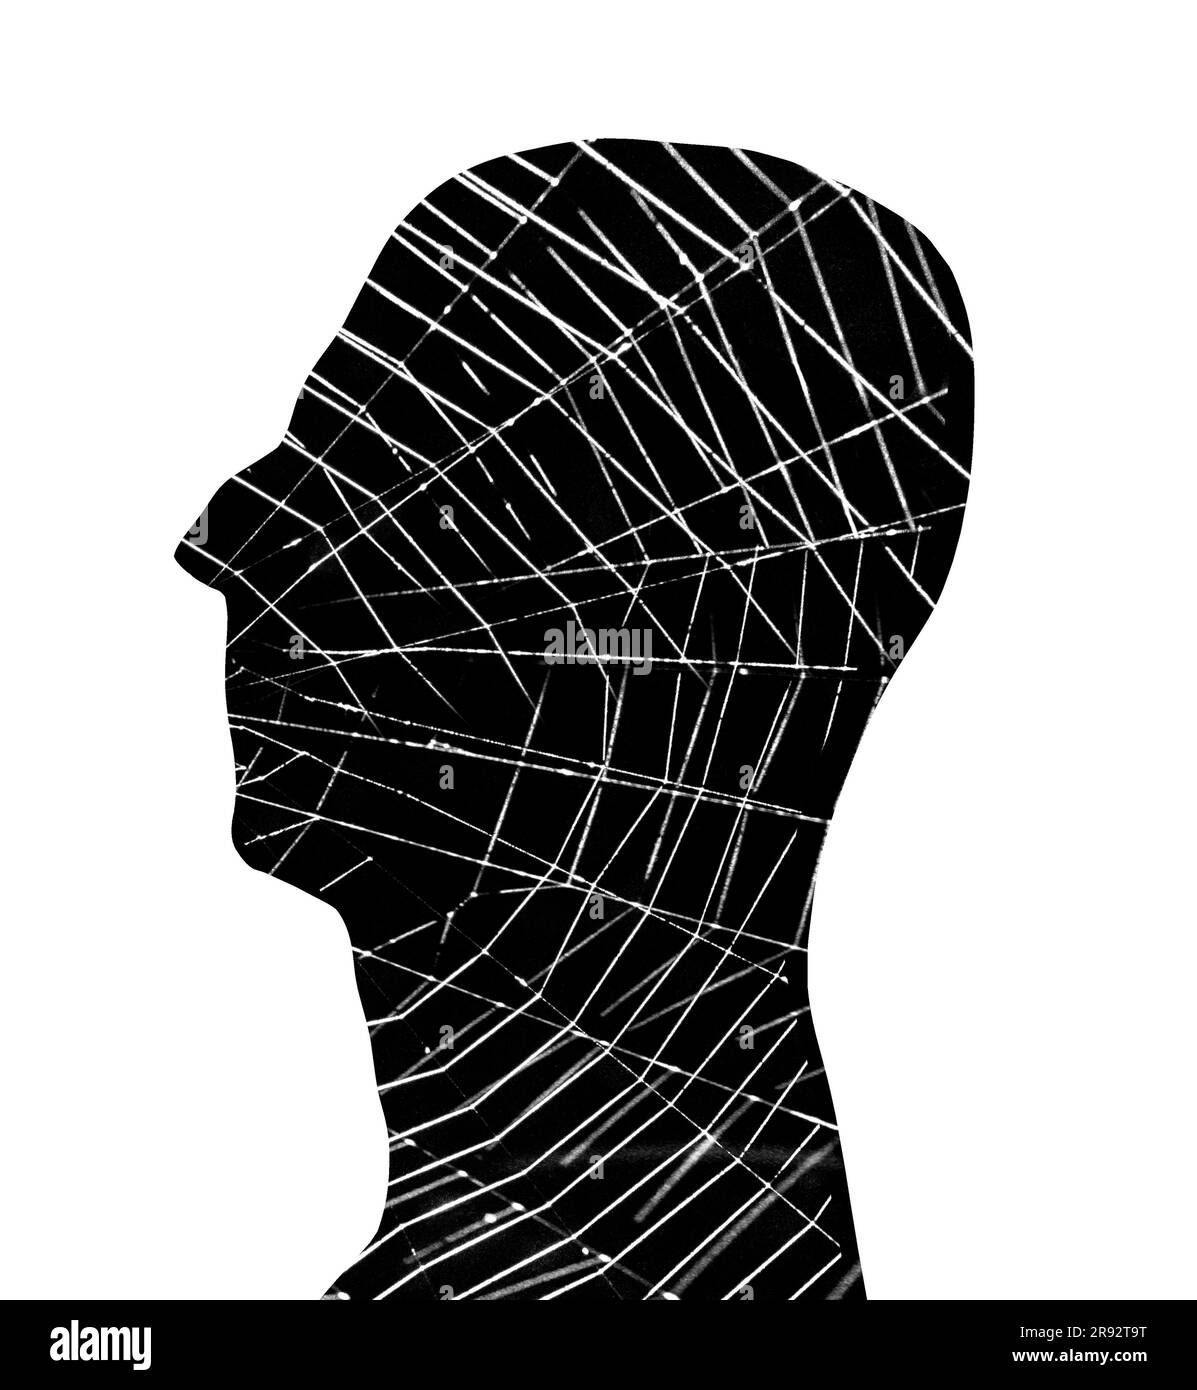 Man's head with a web inside, conceptual illustration Stock Photo